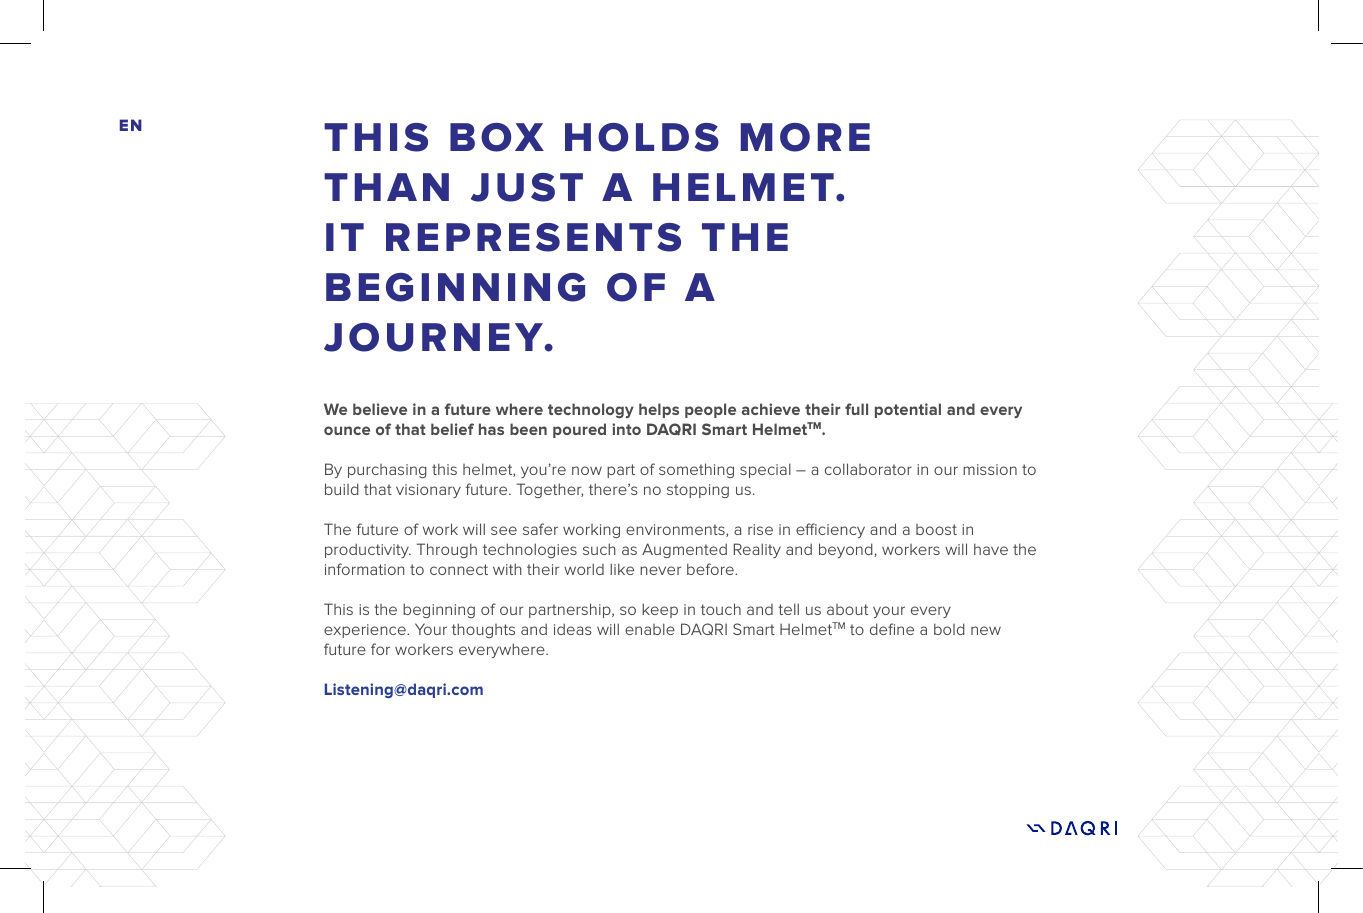 THIS BOX HOLDS MORE THAN JUST A HELMET. IT REPRESENTS THE BEGINNING OF A JOURNEY.ENWe believe in a future where technology helps people achieve their full potential and every ounce of that belief has been poured into DAQRI Smart HelmetTM. By purchasing this helmet, you’re now part of something special – a collaborator in our mission to build that visionary future. Together, there’s no stopping us. The future of work will see safer working environments, a rise in eciency and a boost in productivity. Through technologies such as Augmented Reality and beyond, workers will have the information to connect with their world like never before. This is the beginning of our partnership, so keep in touch and tell us about your every experience. Your thoughts and ideas will enable DAQRI Smart HelmetTM to deﬁne a bold new future for workers everywhere.Listening@daqri.com